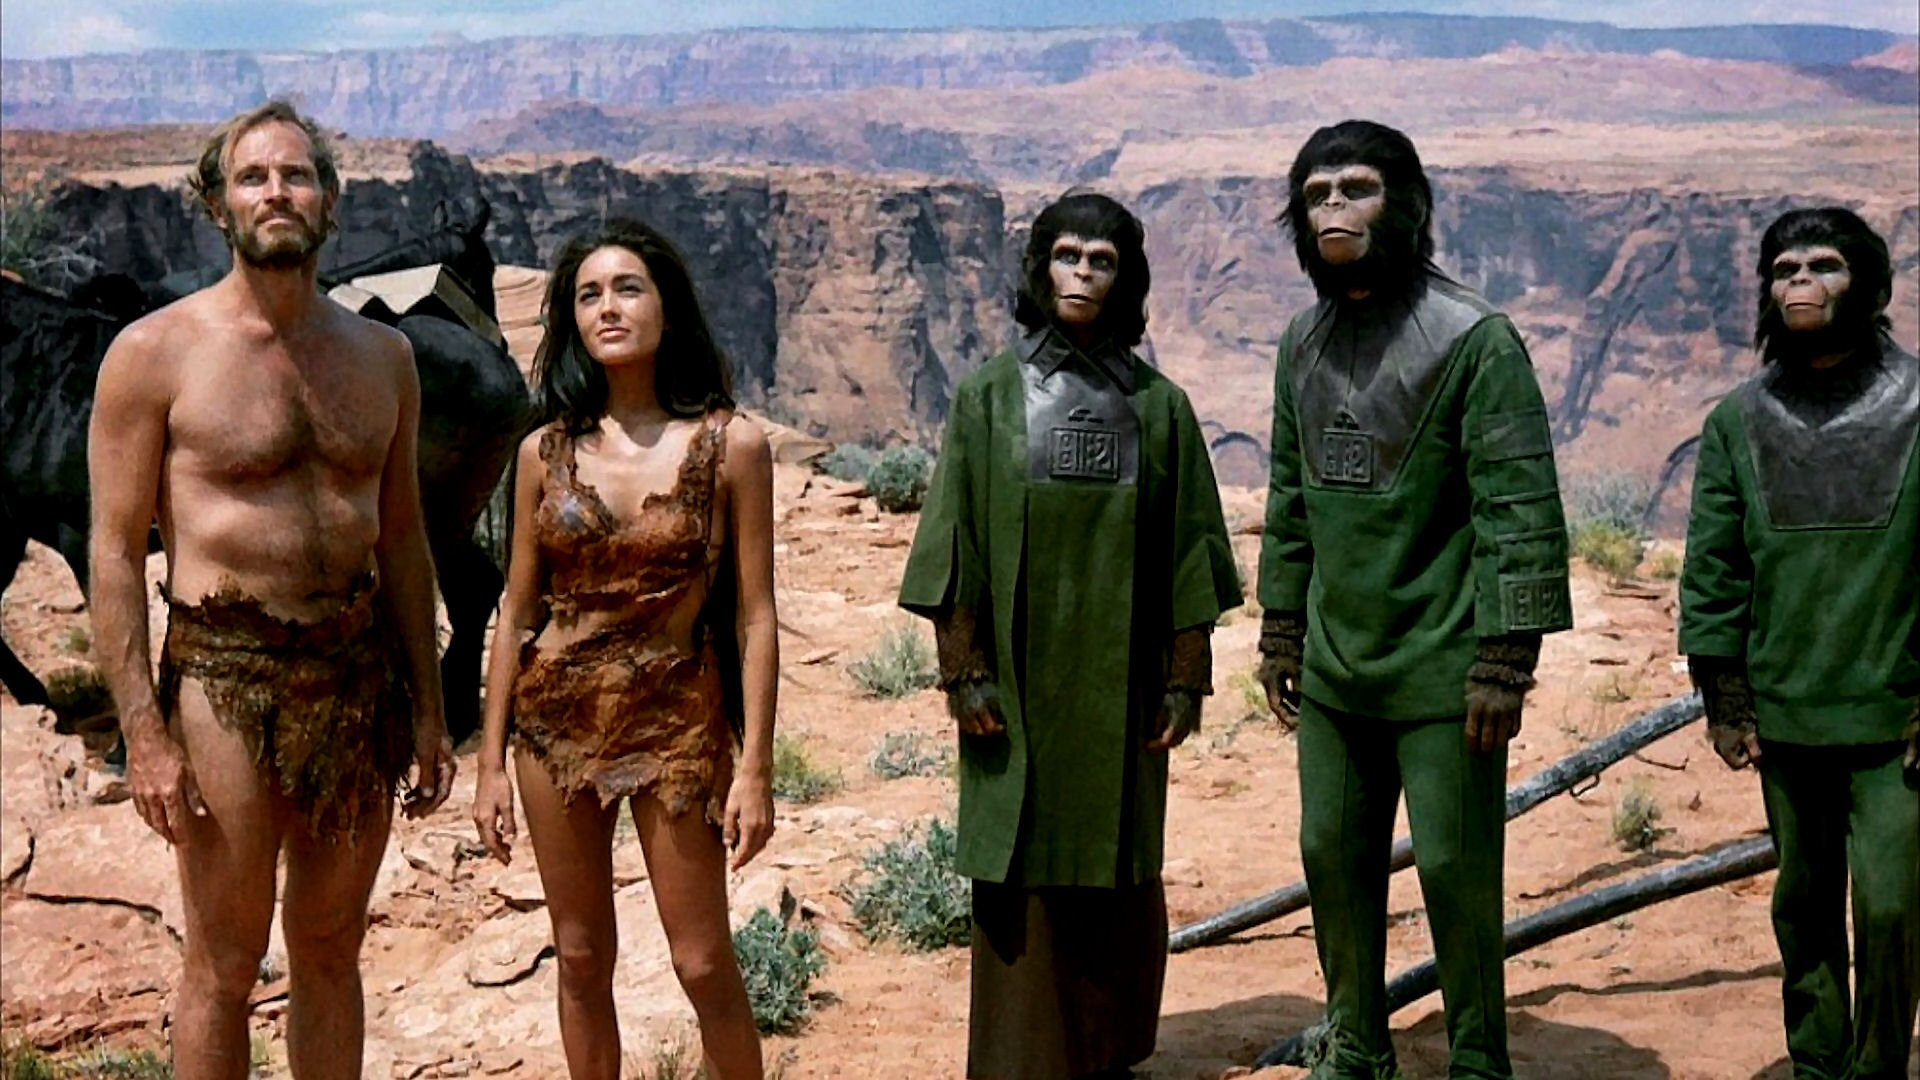 Planet of the Apes Wallpaper Planet of the Apes Movie Wallpapers